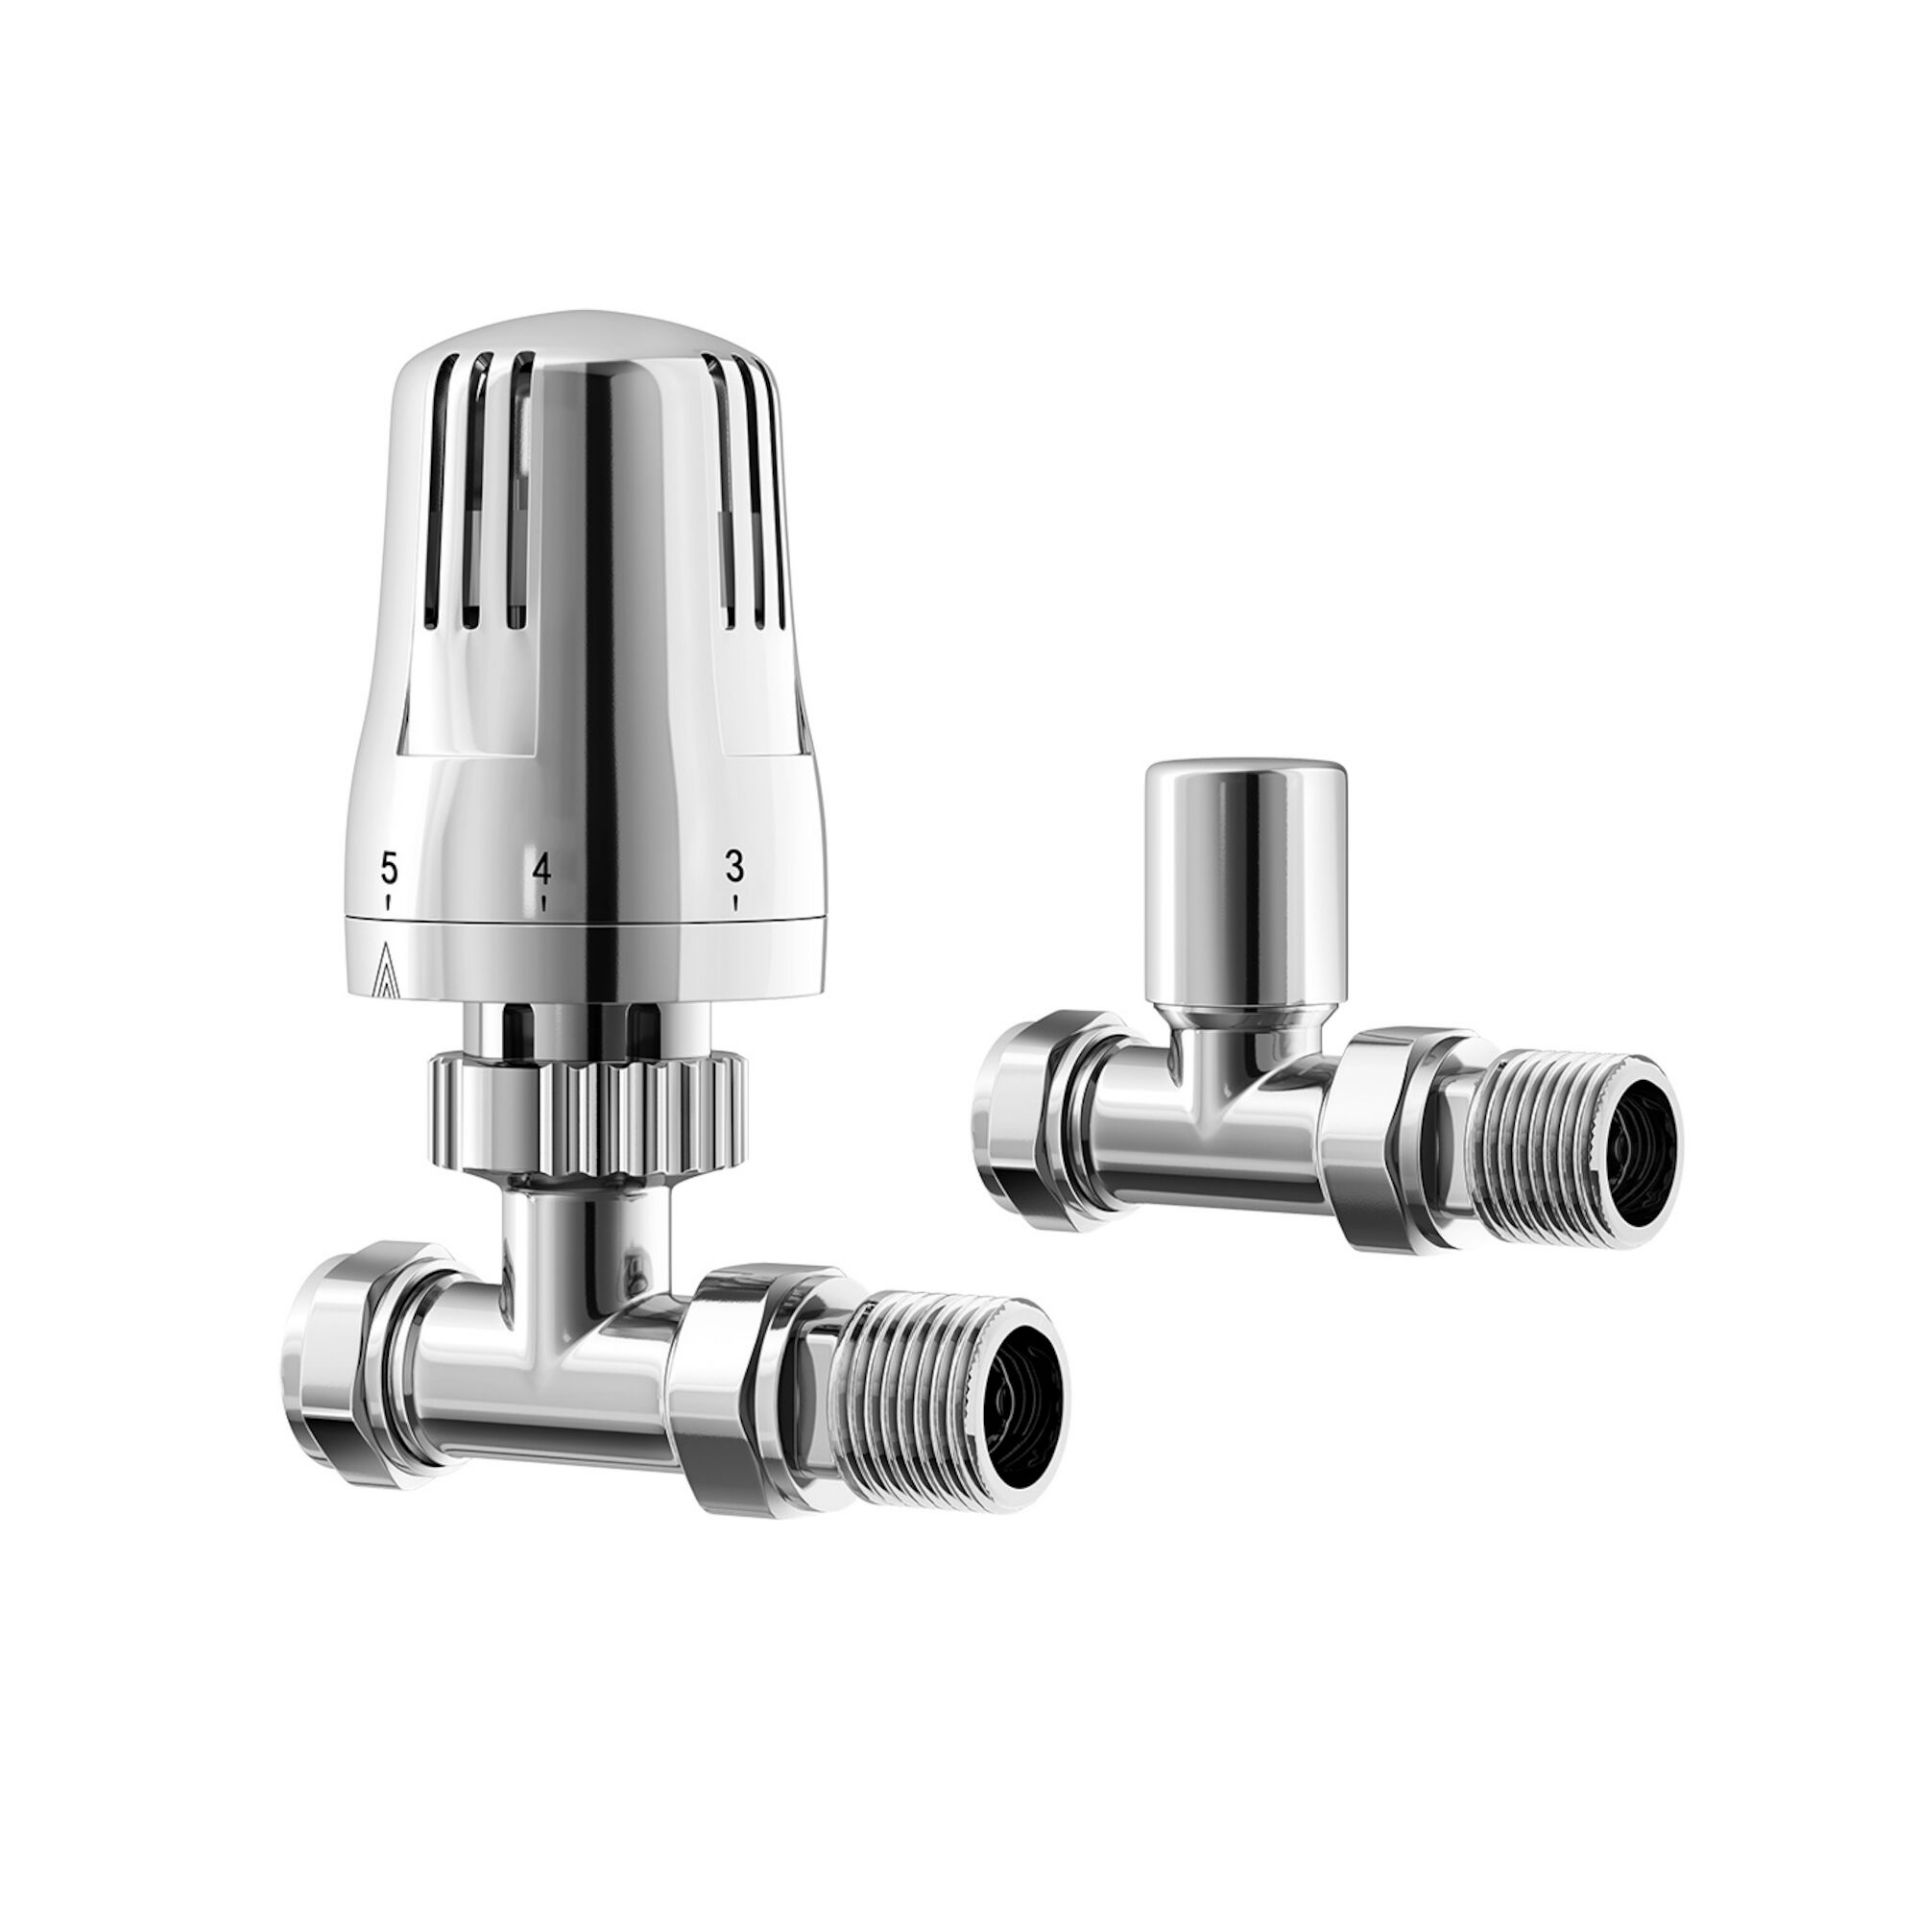 (NV1006) 15mm Standard Connection Thermostatic Straight Chrome Radiator Valves Chrome Plated S... - Image 2 of 2